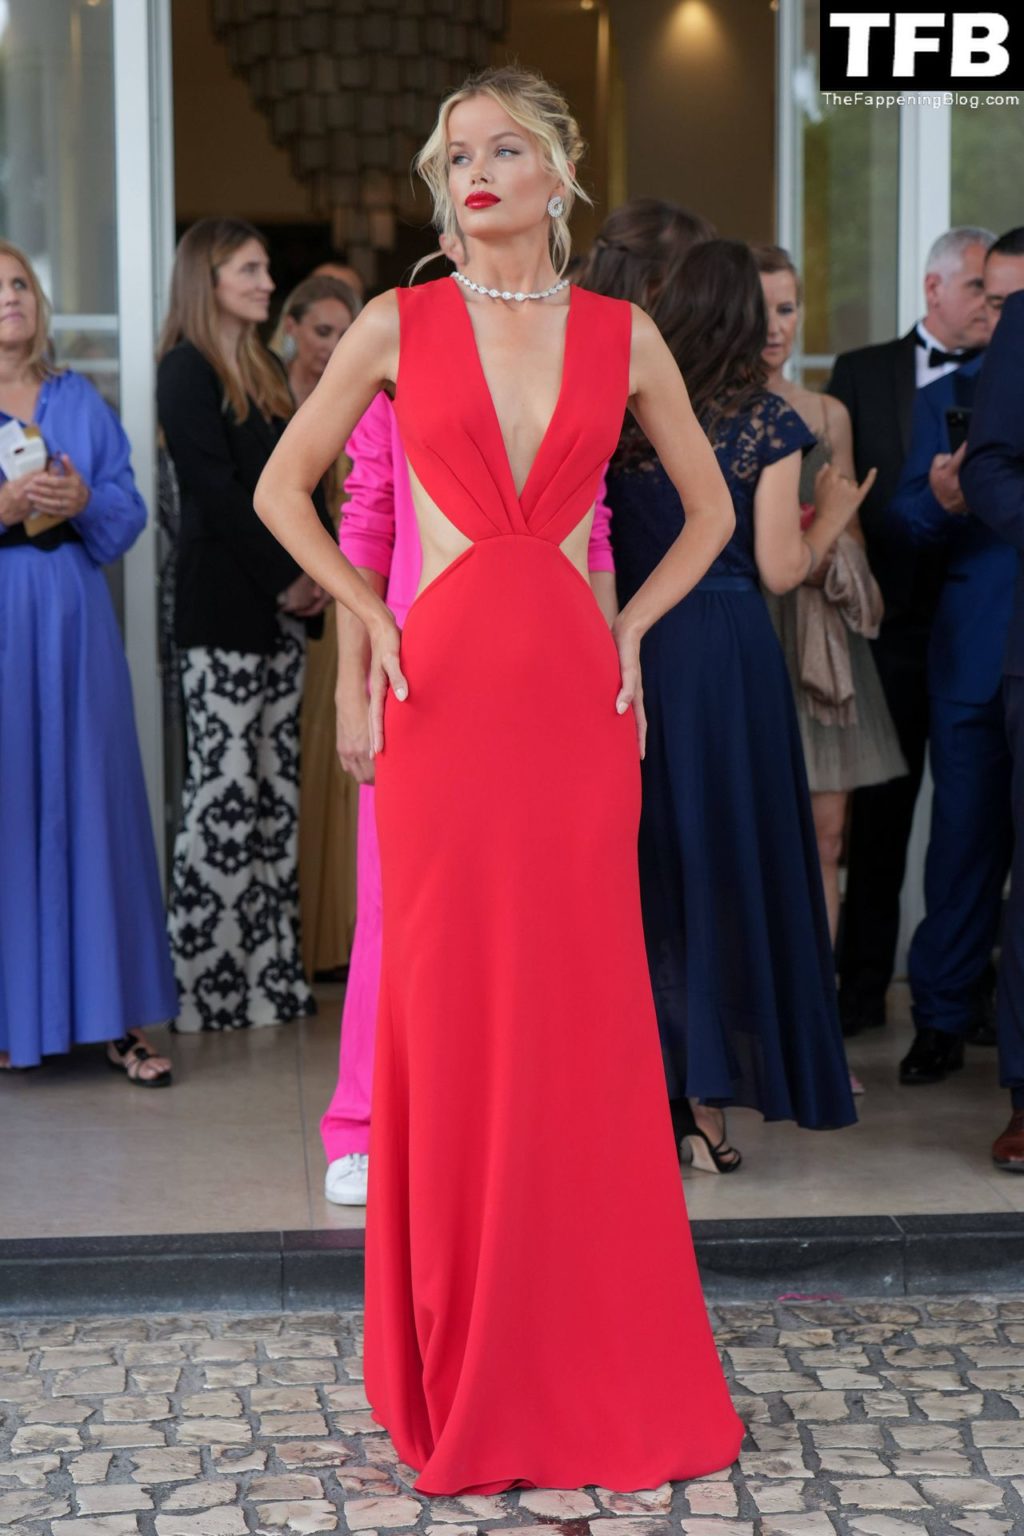 Frida Aasen Sexy The Fappening Blog 147 1024x1536 - Frida Aasen Looks Stunning in a Red Dress at the 75th Annual Cannes Film Festival (153 Photos)